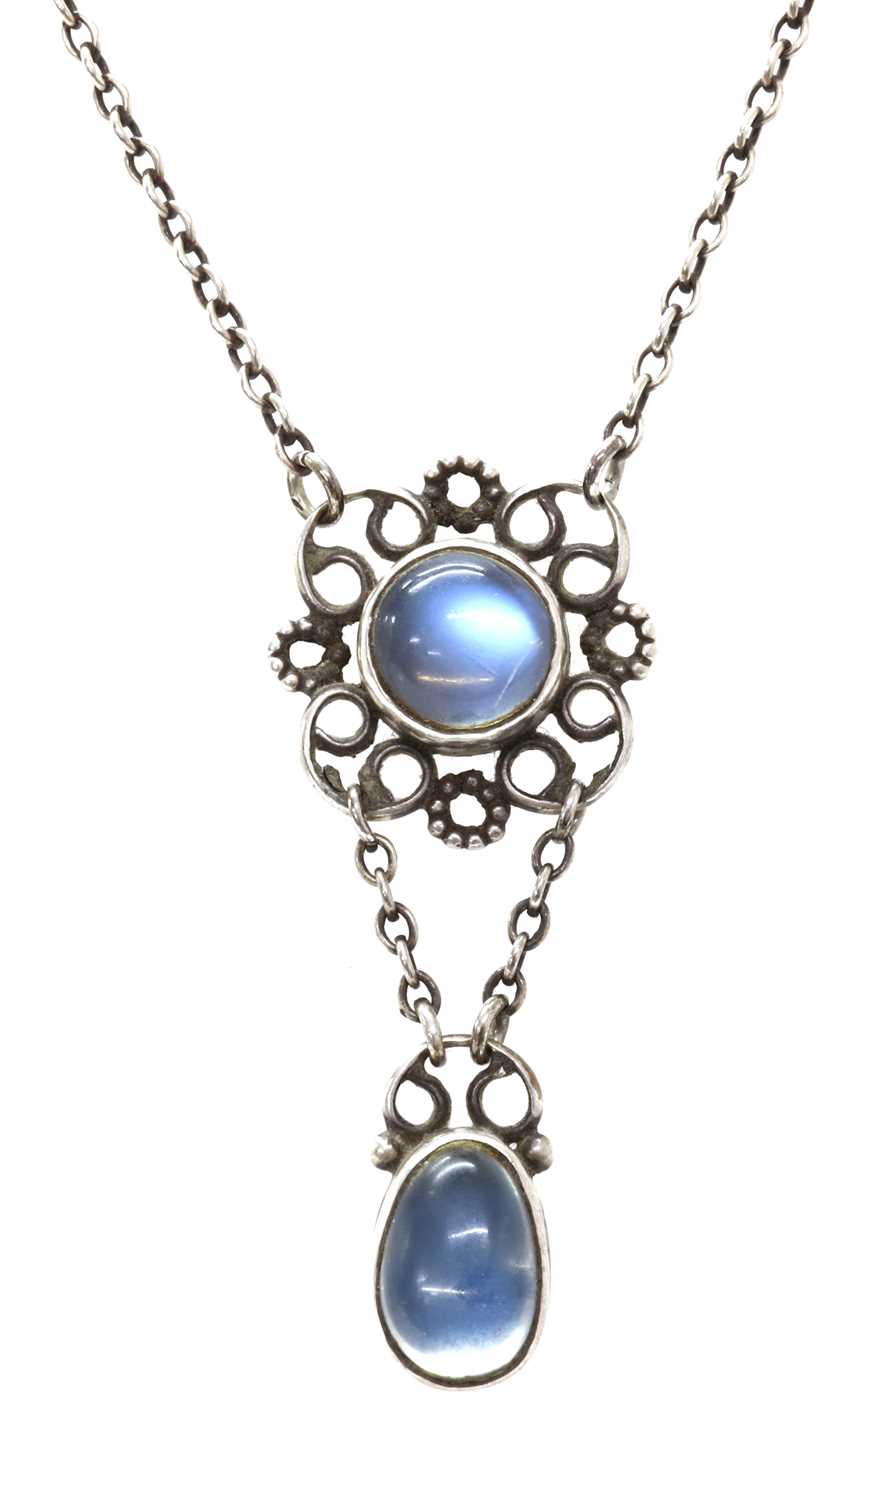 Lot 76 - An Arts & Crafts moonstone necklace